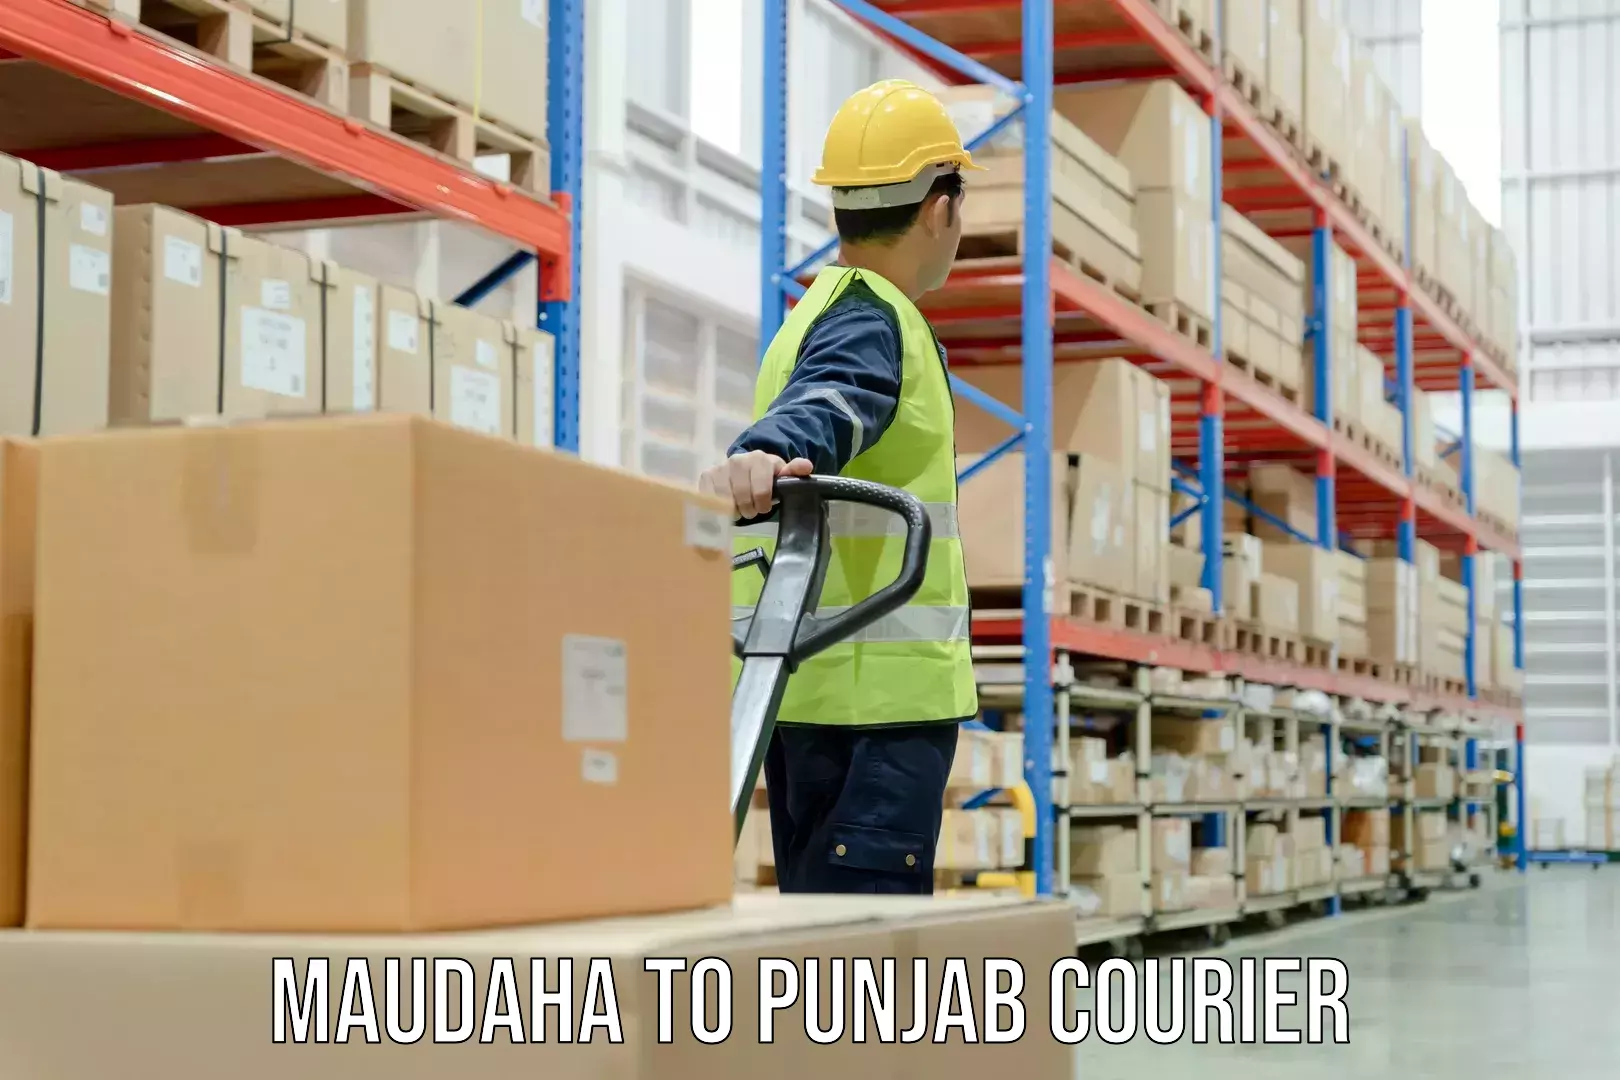 Local delivery service Maudaha to Punjab